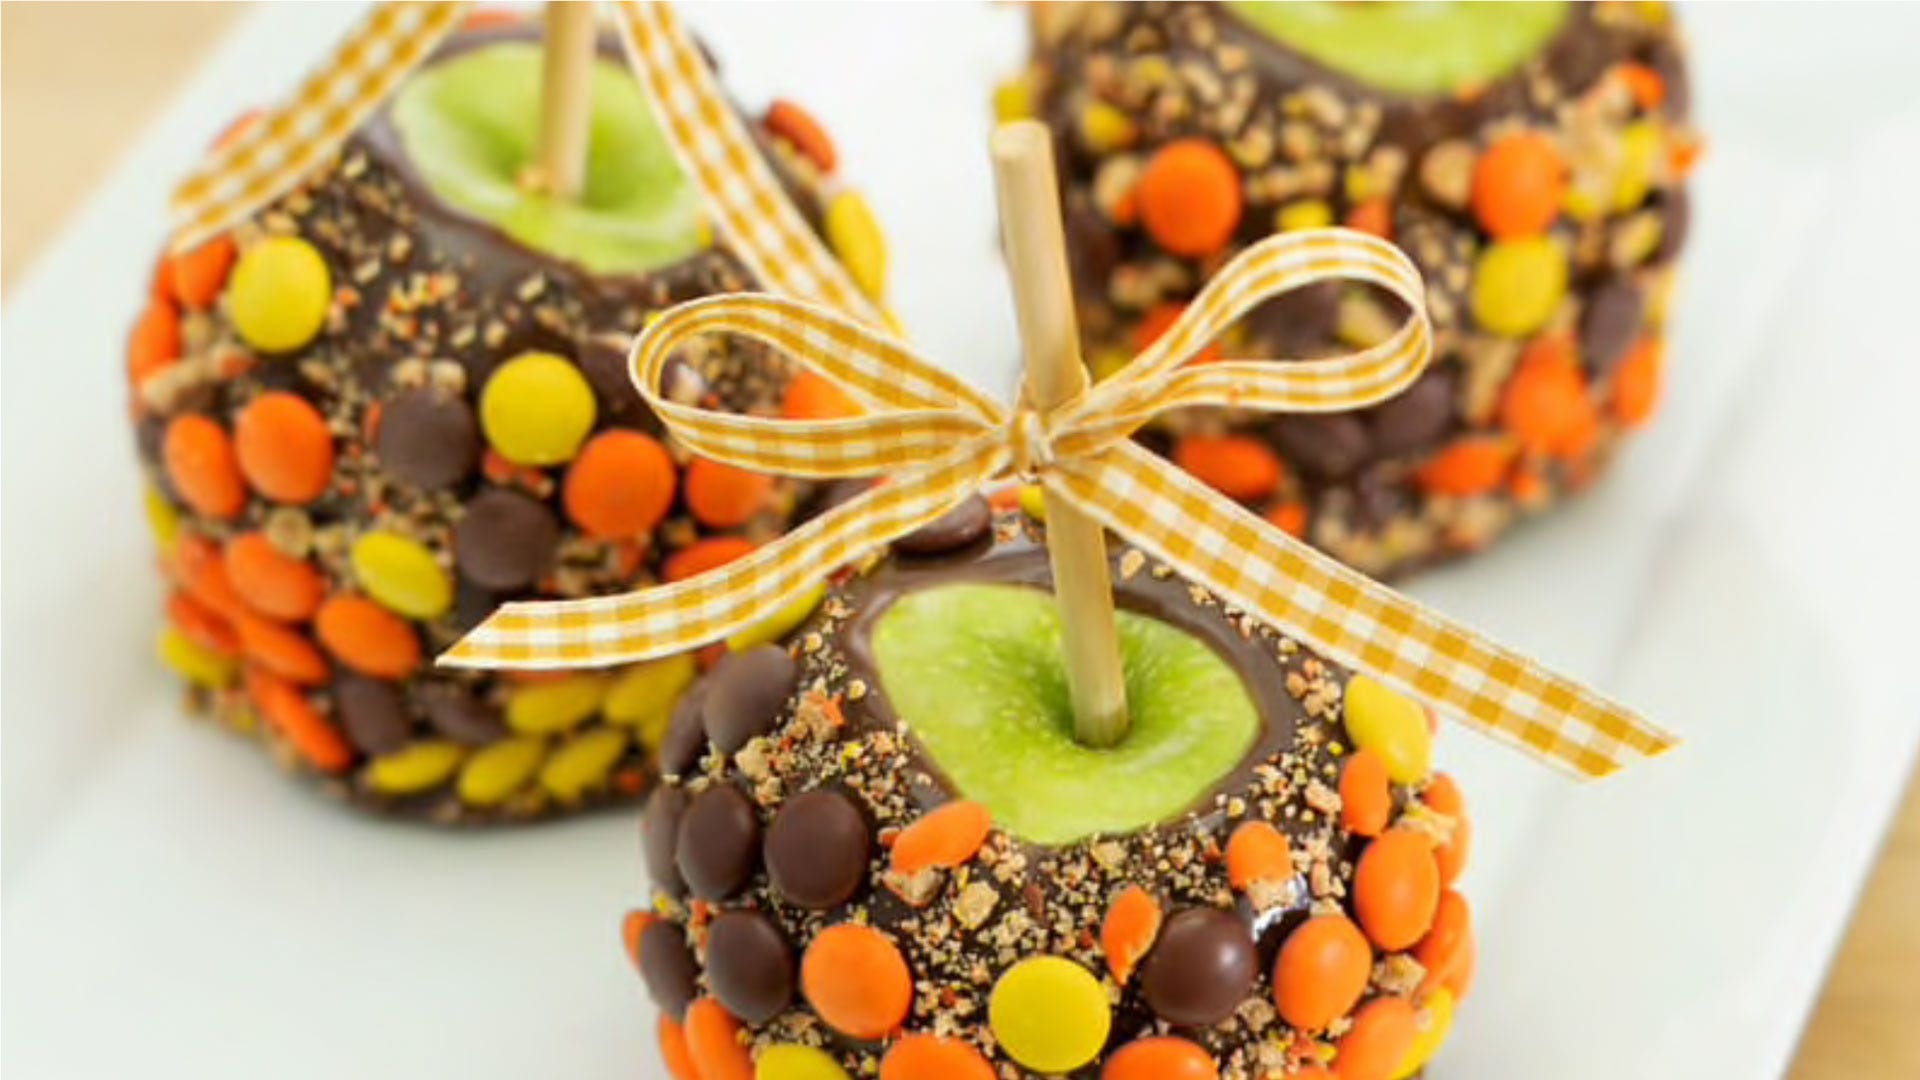 Image of REESES PIECES Chocolate and Caramel Apple